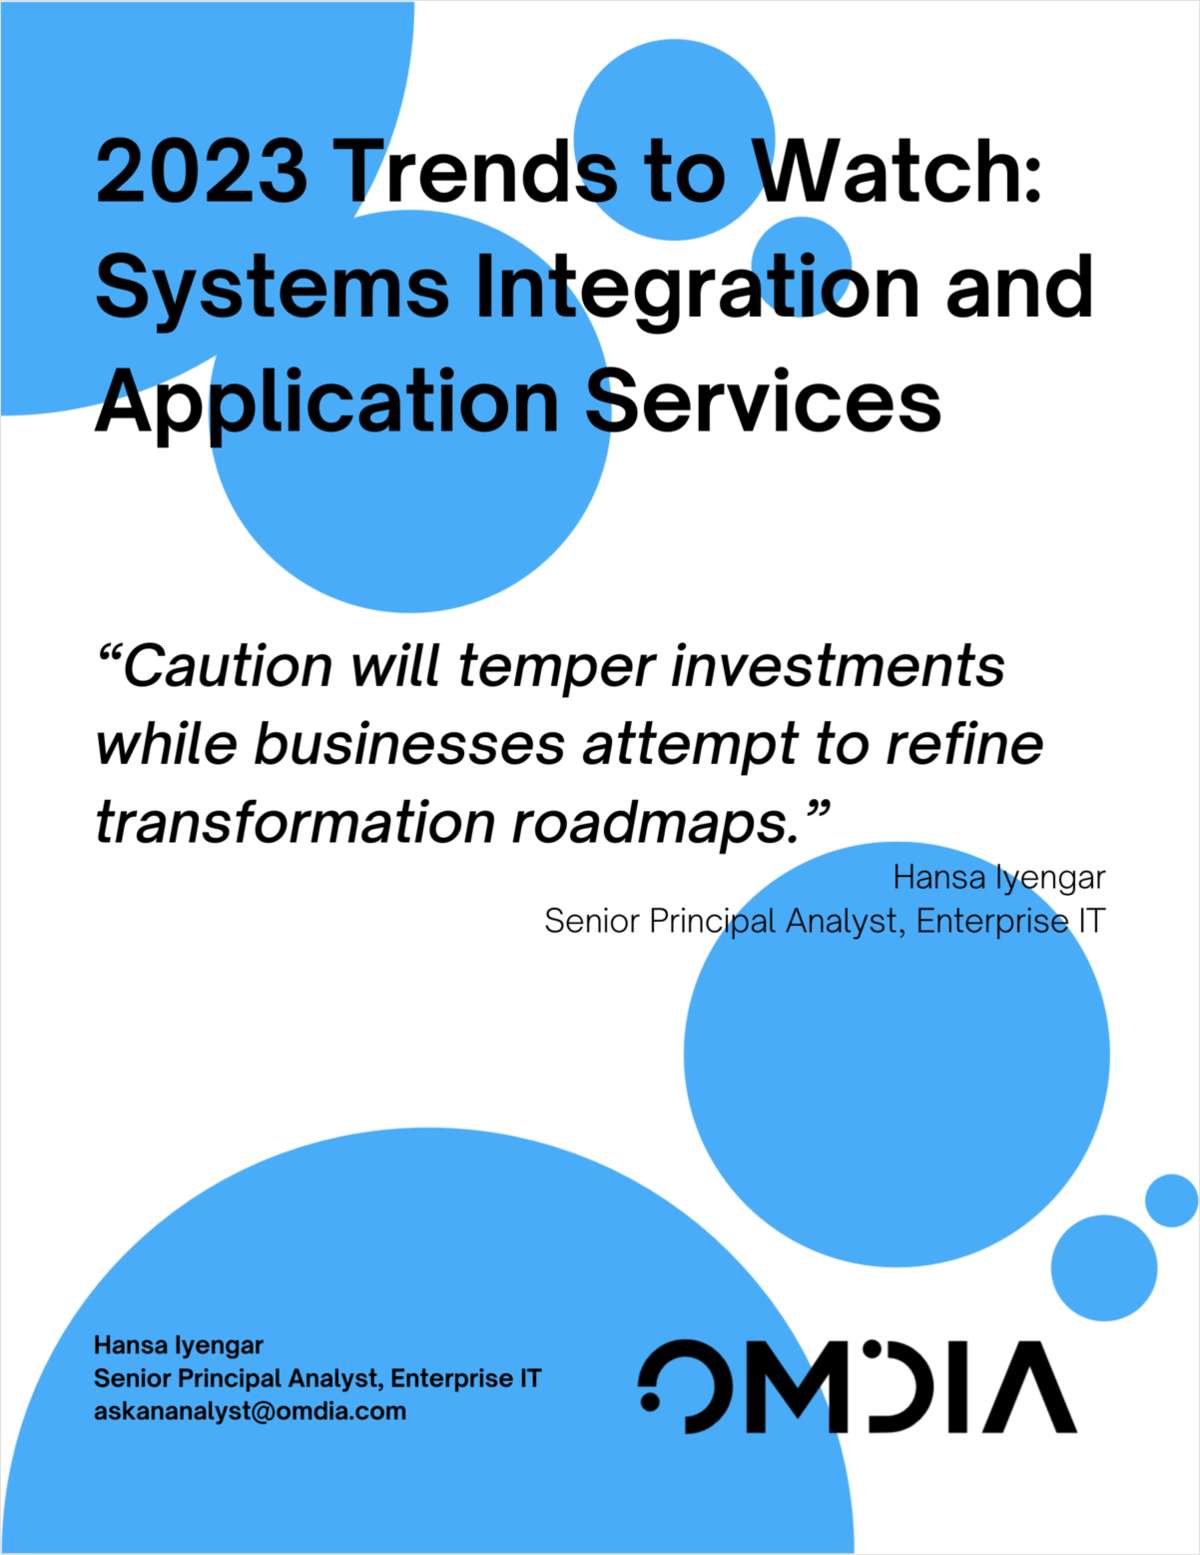 2023 Trends to Watch: Systems Integration and Application Services